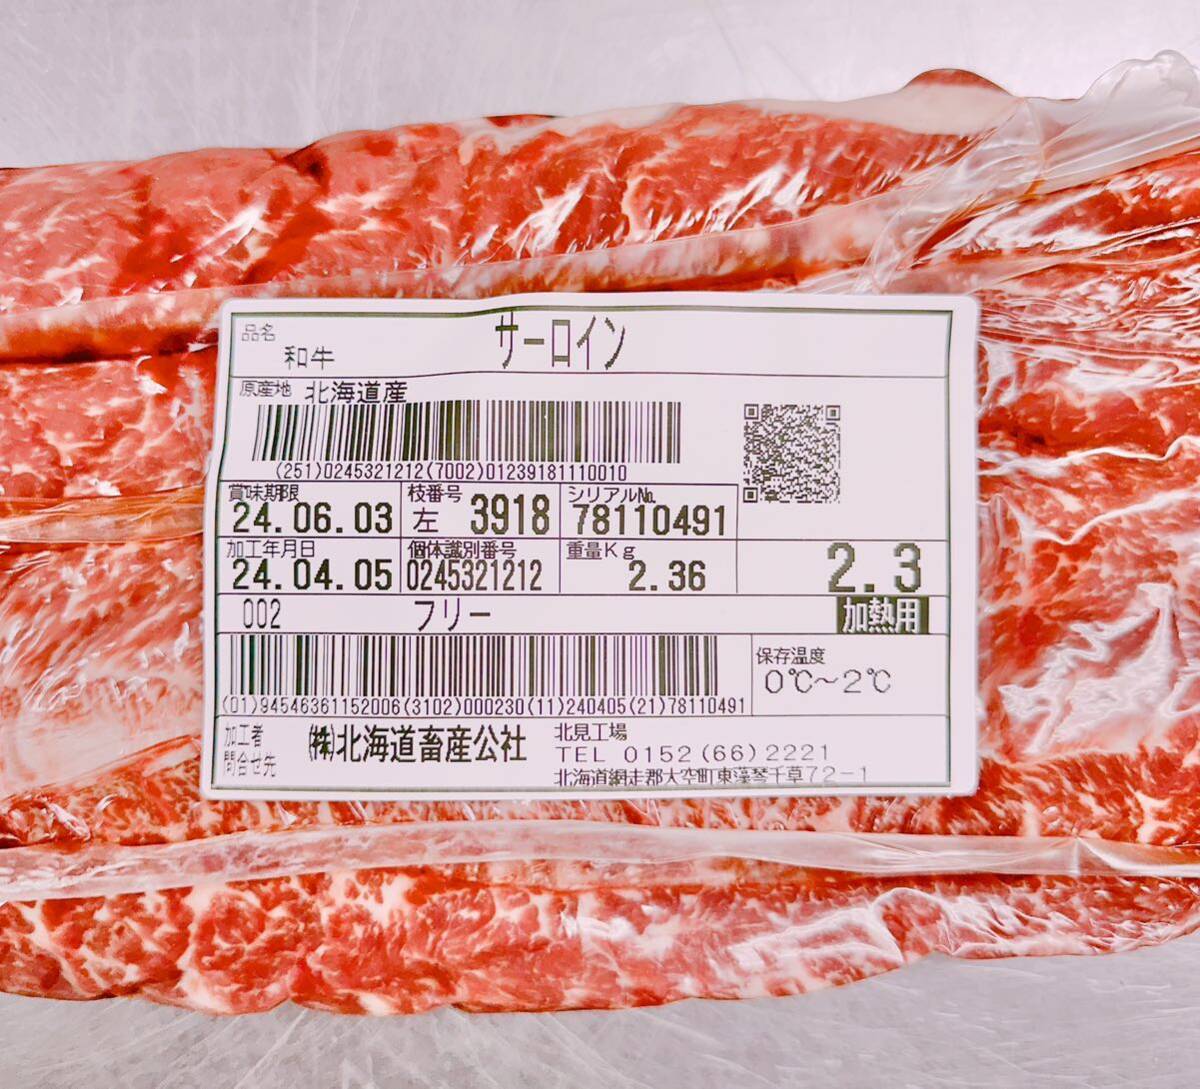 [ Grimm ki]1 jpy start Hokkaido production black wool peace cow sirloin 2300g steak BBQ barbecue gift .. year-end gift business use 